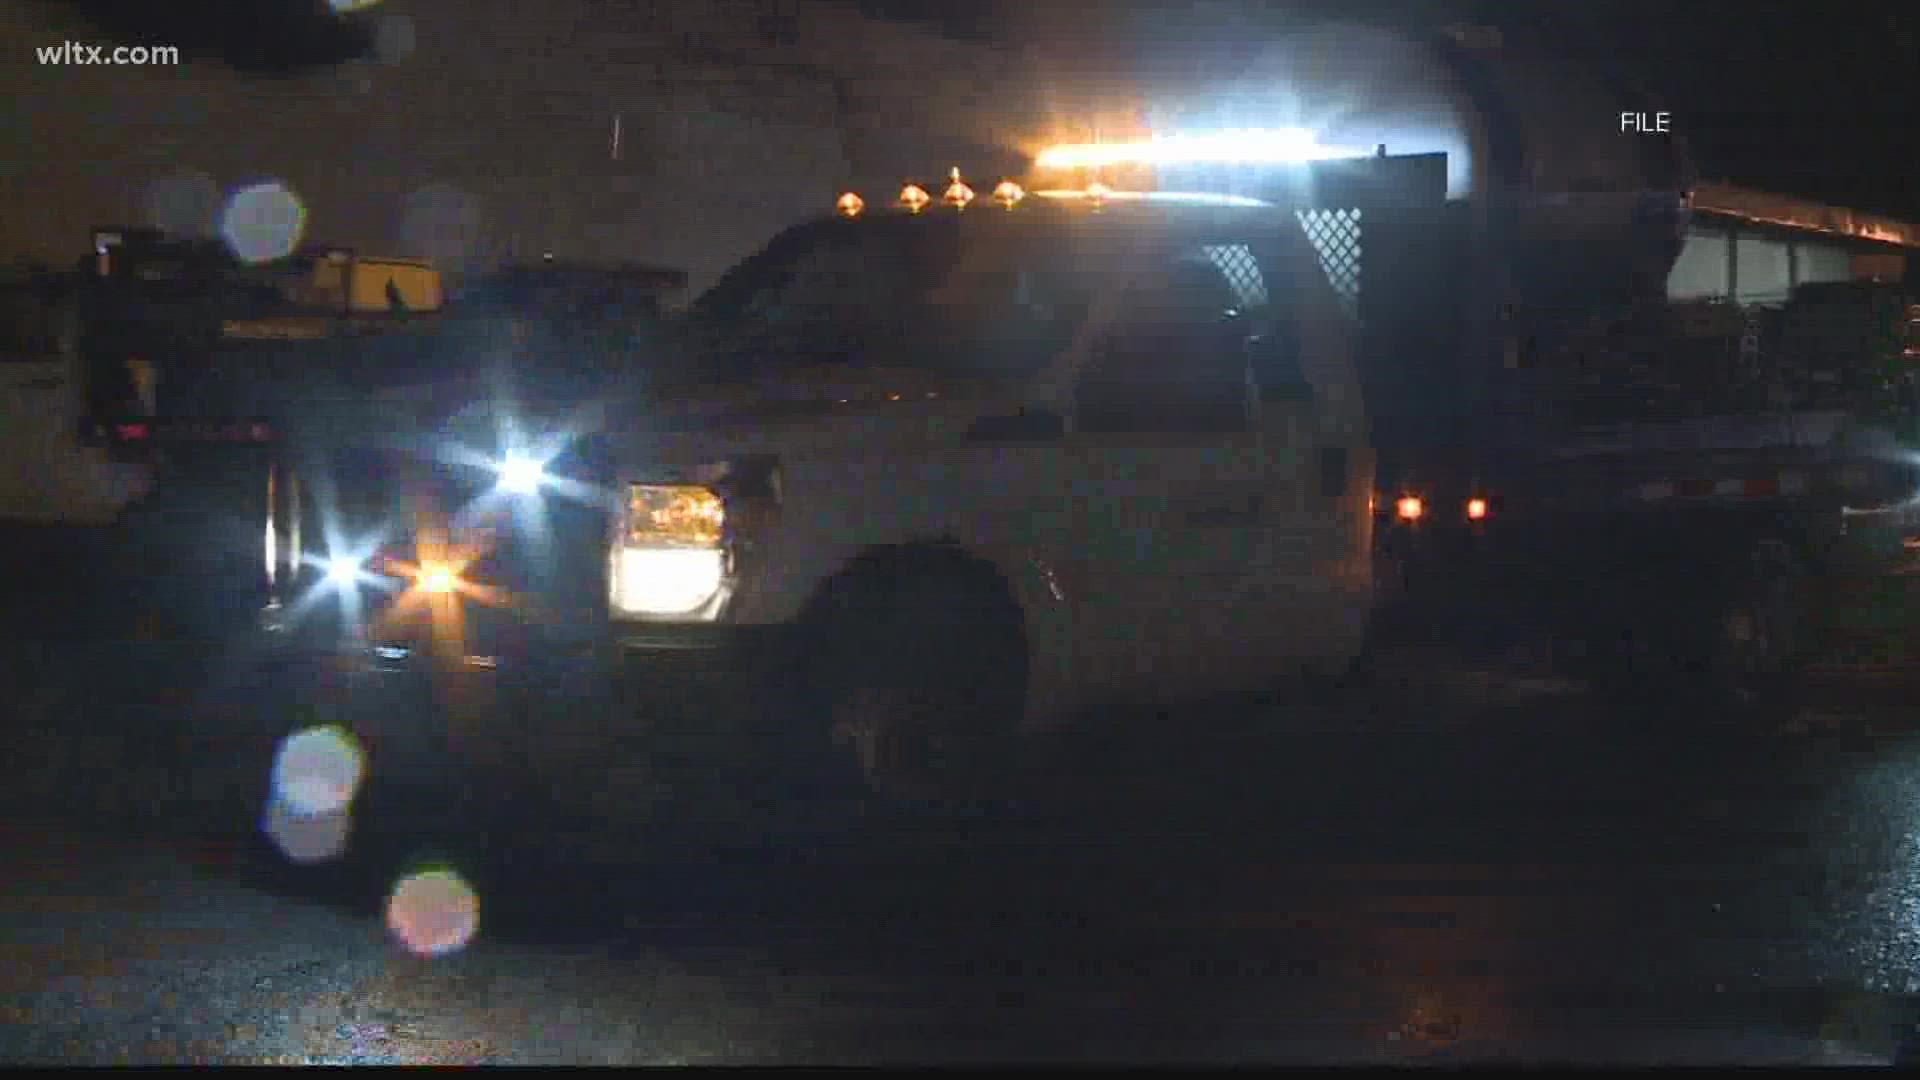 After days of preparation, emergency crews in South Carolina say they're ready to respond to the winter storm.